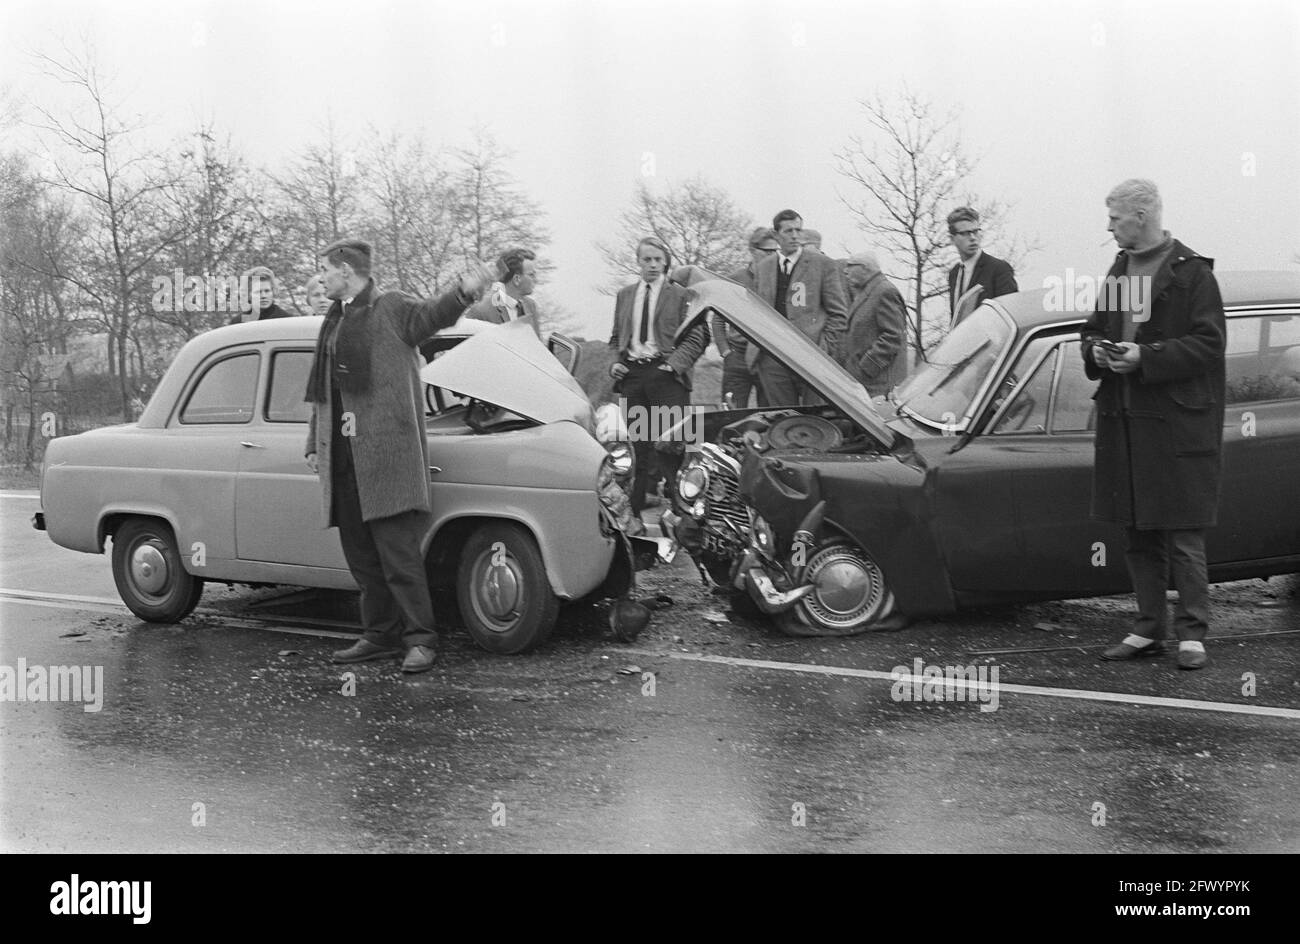 Pontiac Parisienne : canadienne pur sucre… ? Car-accident-near-coevorden-april-16-1966-car-accidents-the-netherlands-20th-century-press-agency-photo-news-to-remember-documentary-historic-photography-1945-1990-visual-stories-human-history-of-the-twentieth-century-capturing-moments-in-time-2FWYPYK